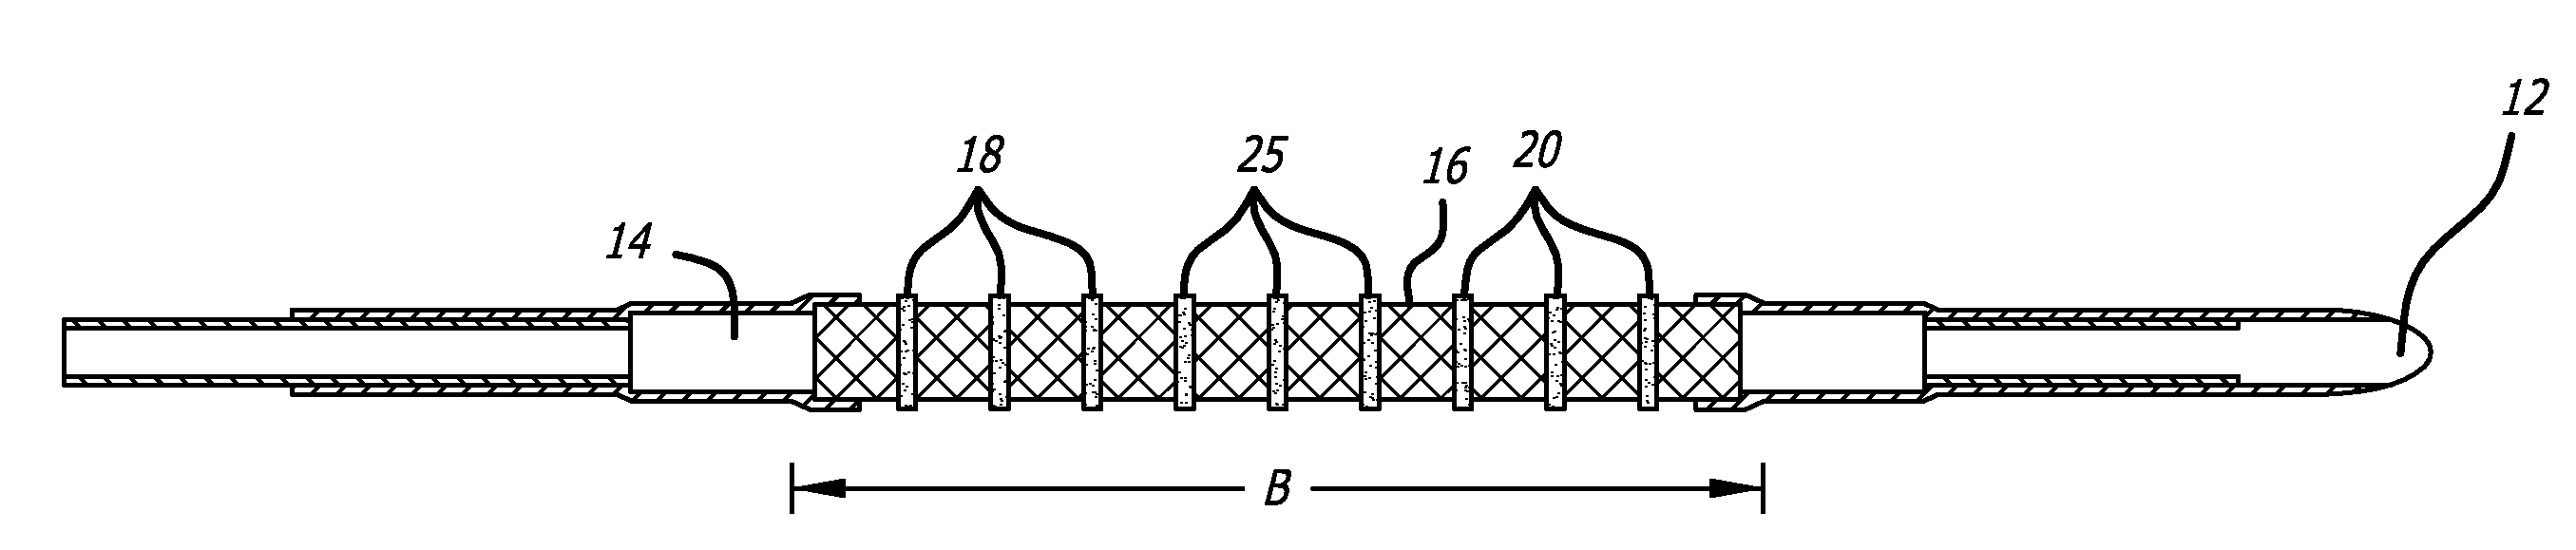 Tethered Self-Expanding Stent Delivery System